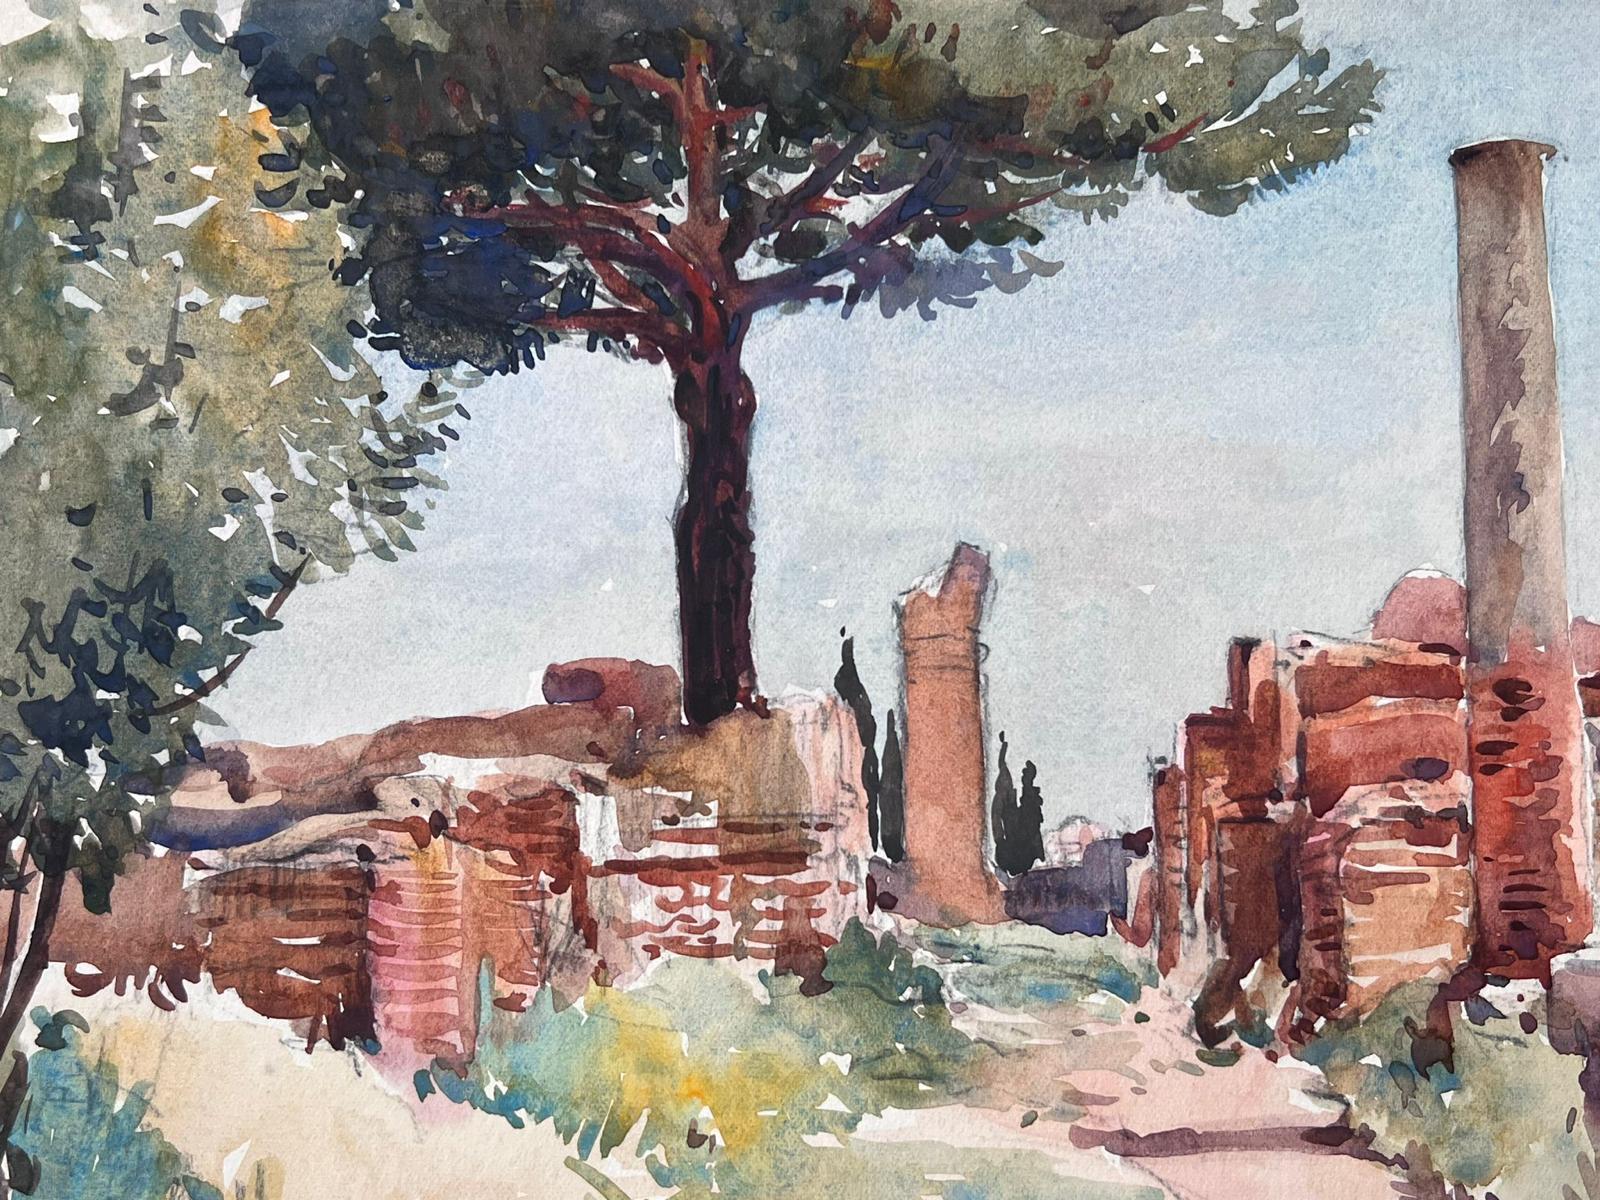 Ostia (Roman Ruins)
Jean La Forgue (French 1901-1975) watercolour on paper, unframed
painting: 10.5 x 15inches
provenance: the artists estate, France
condition: very good and sound condition; there are minor age related marks and stains to the